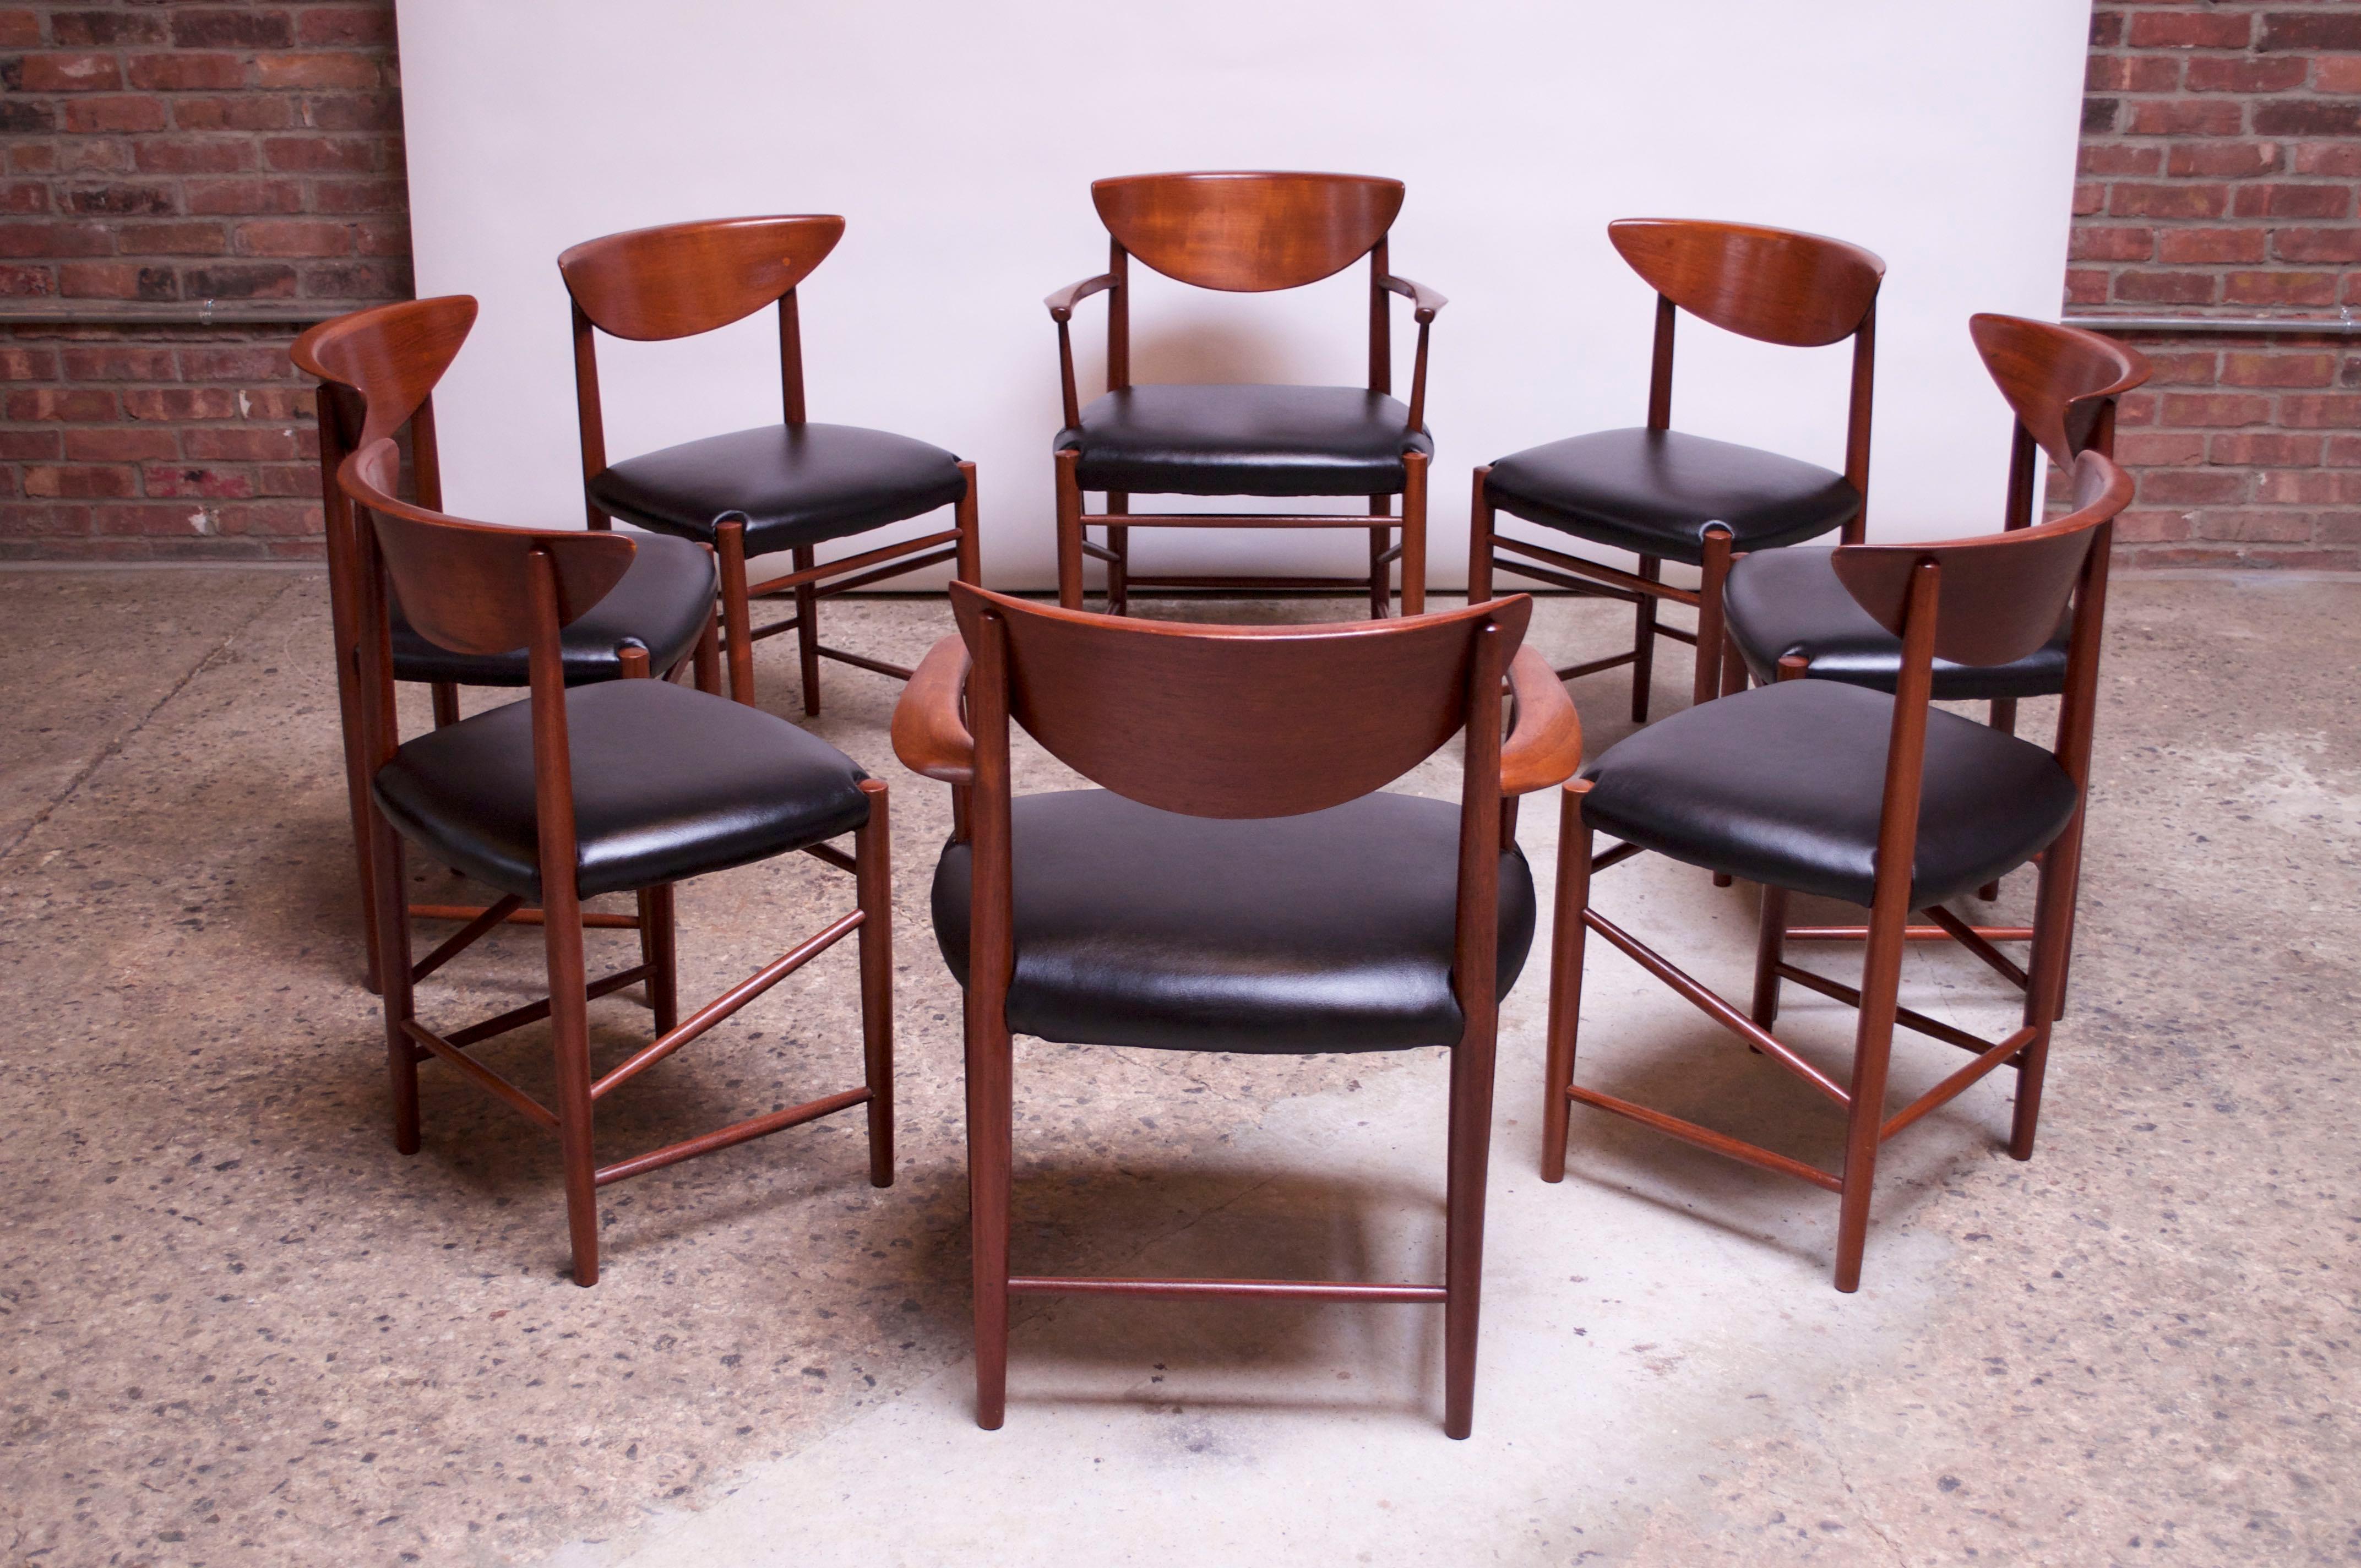 Set of eight dining chairs (Model #316) by Peter Hvidt and Orla Mølgaard Nielsen for Soborg, Denmark, circa 1955-1956. Set includes two armchairs (captains) and six side chairs. 
Composed of solid teak frames with sculpted backs and newly